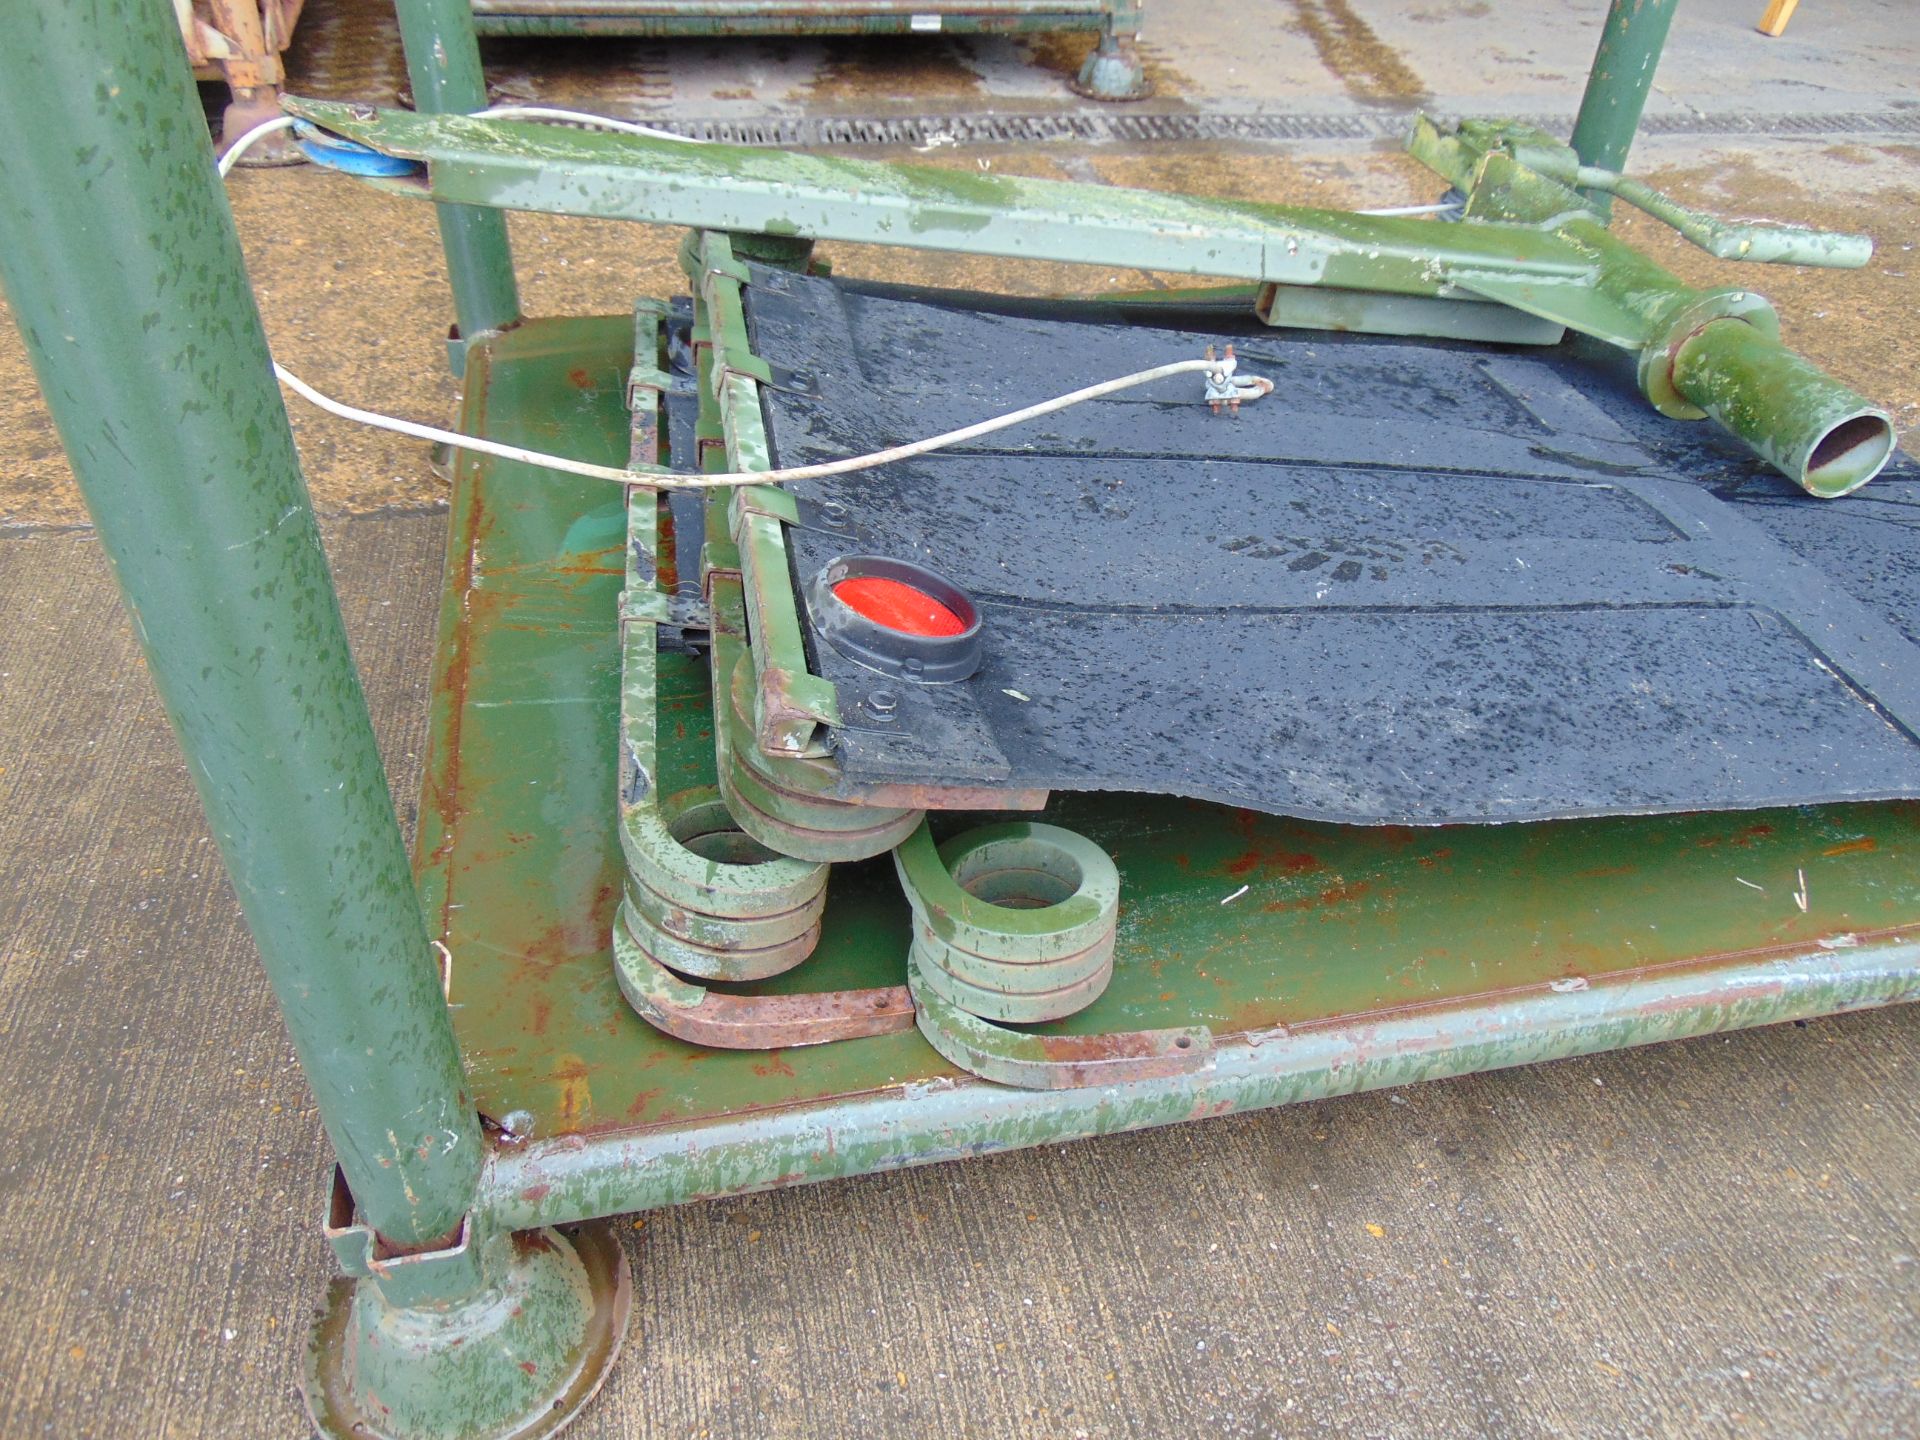 4 x Trailer Mud flaps and Lifting Crane from MoD - Image 6 of 6